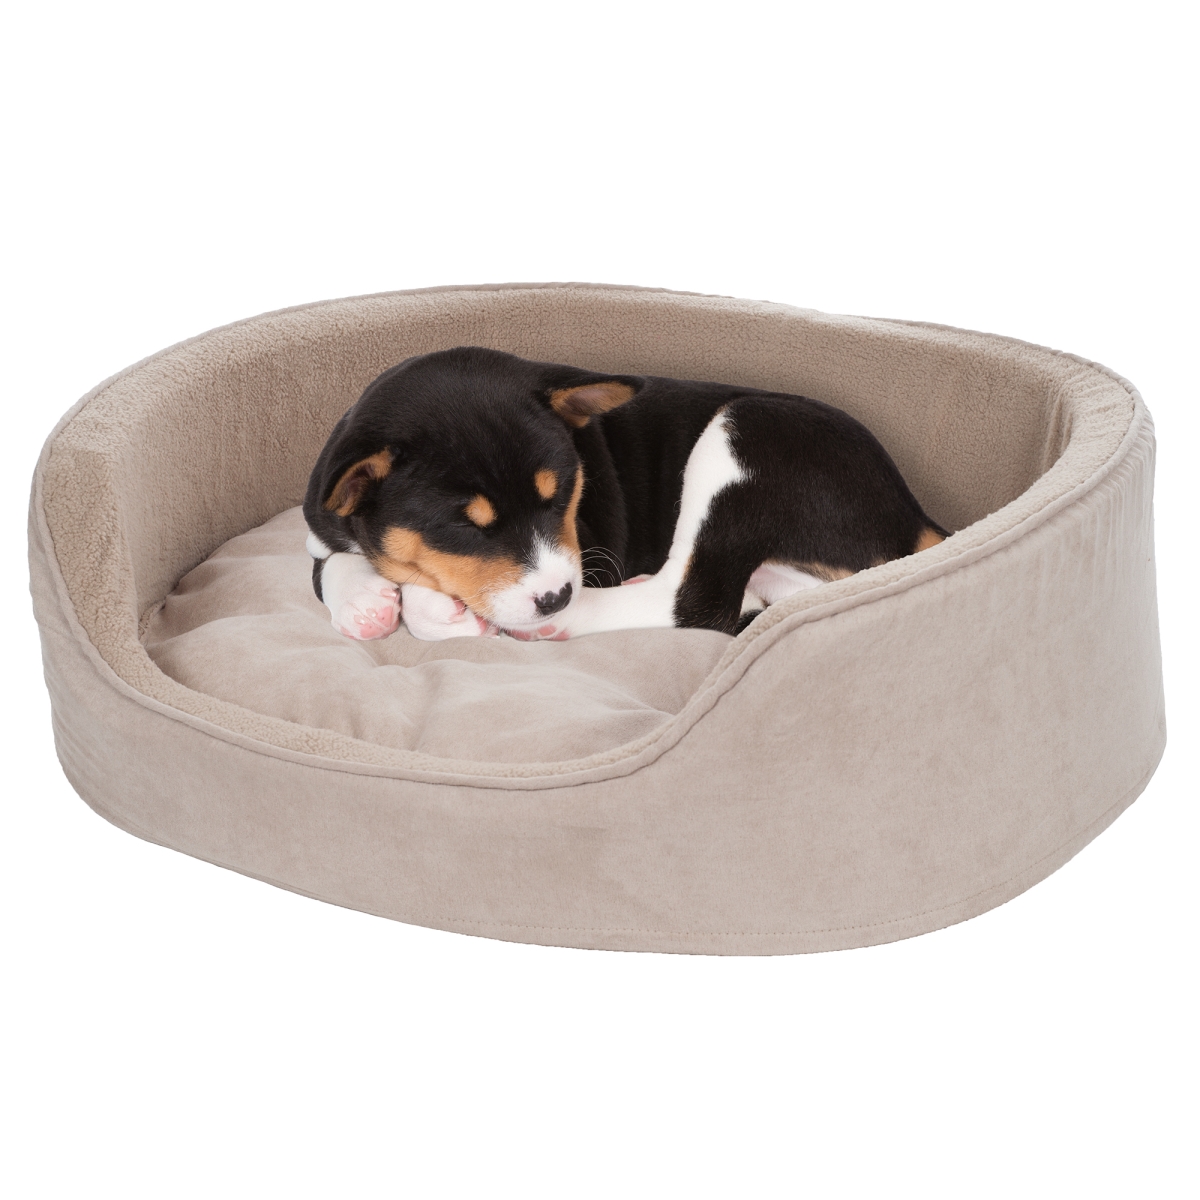 Petmaker 80-pet5003 Small Cuddle Round Microsuede Pet Bed - Clay